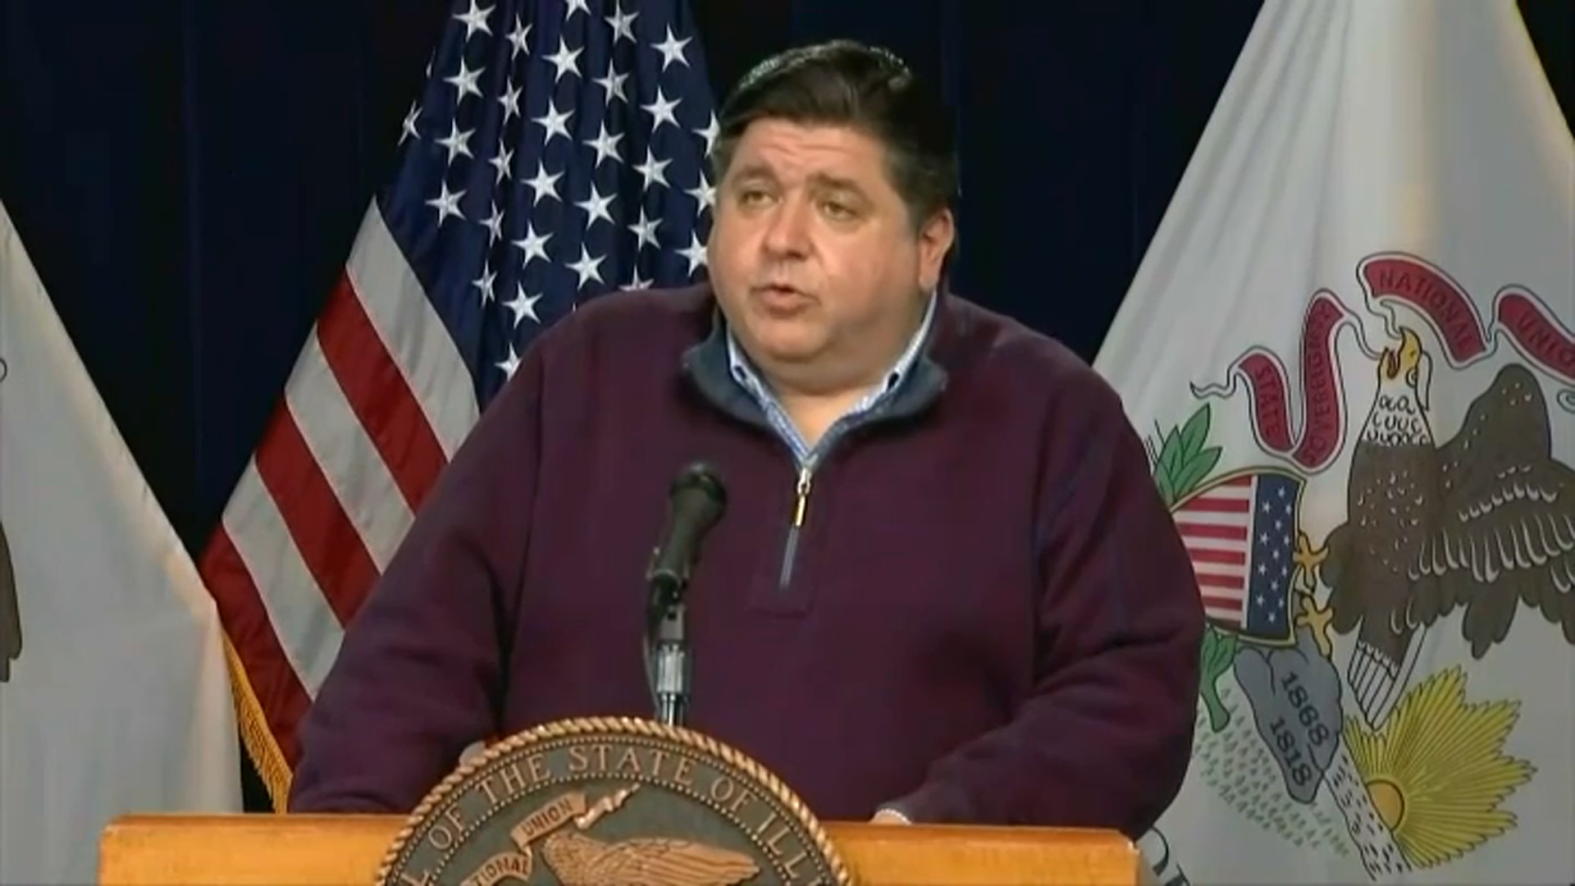 watch-live-gov-pritzker-to-give-covid-19-update-at-2-30-p-m-nbc